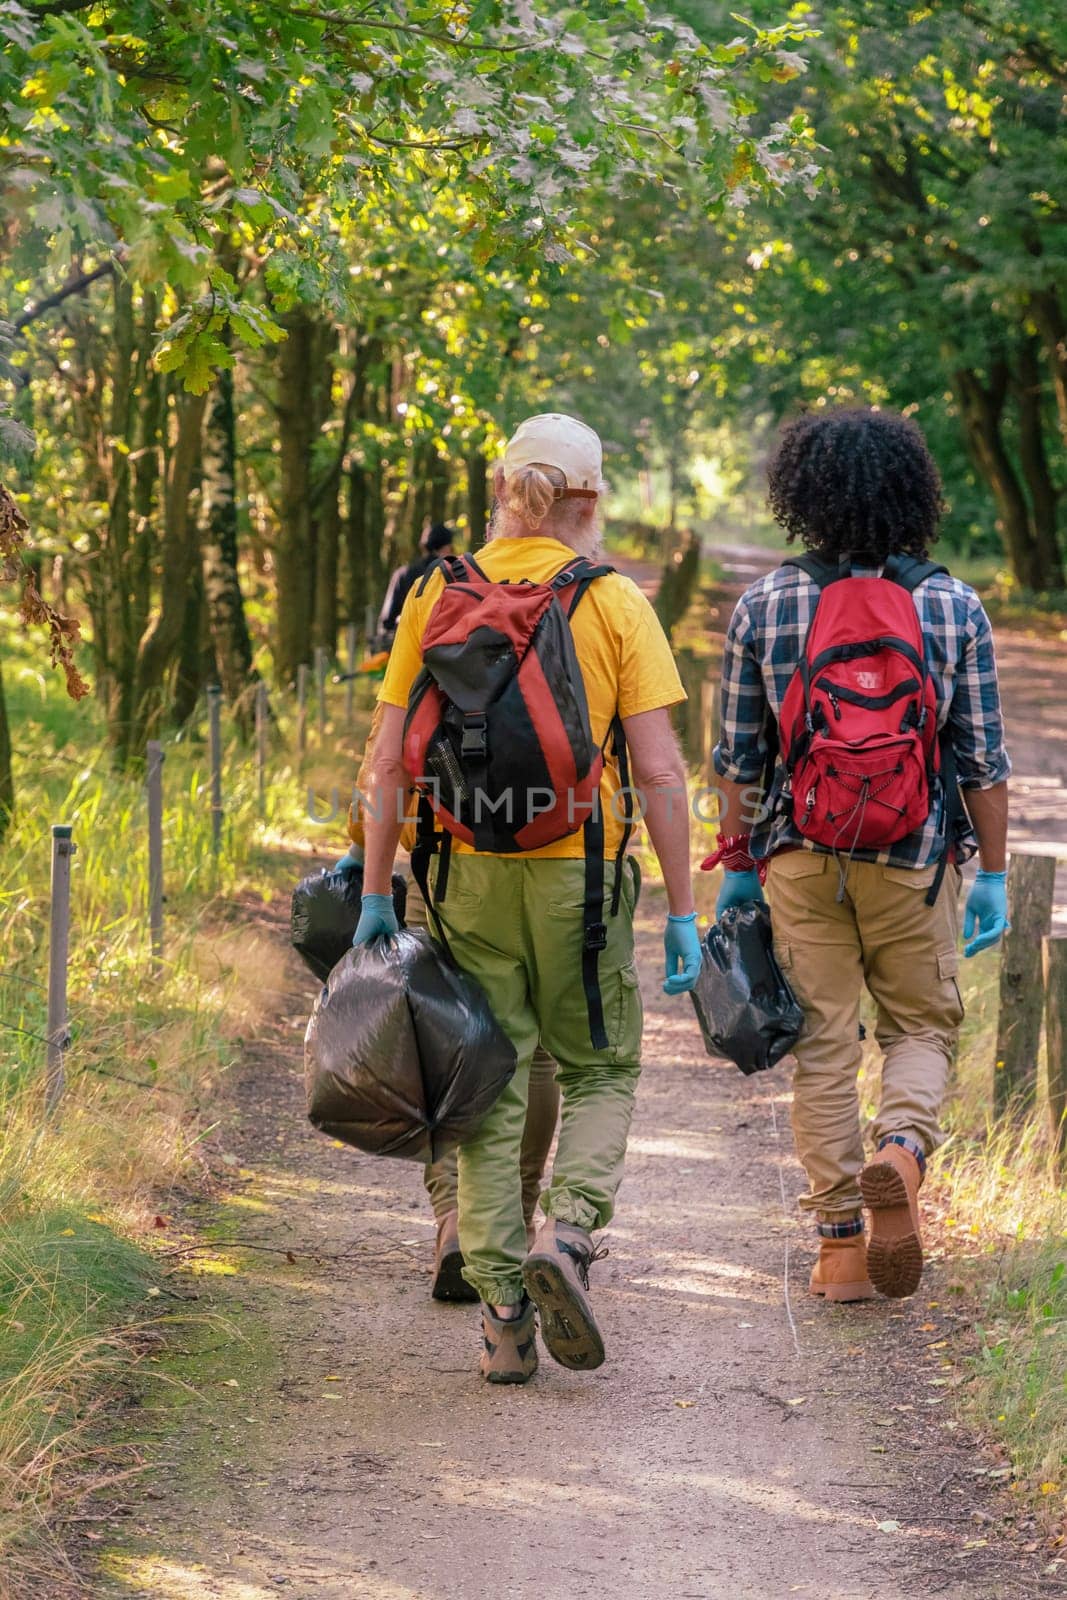 Volunteers of a multinational group go into the forest with bags for collecting and recycling garbage by KaterinaDalemans